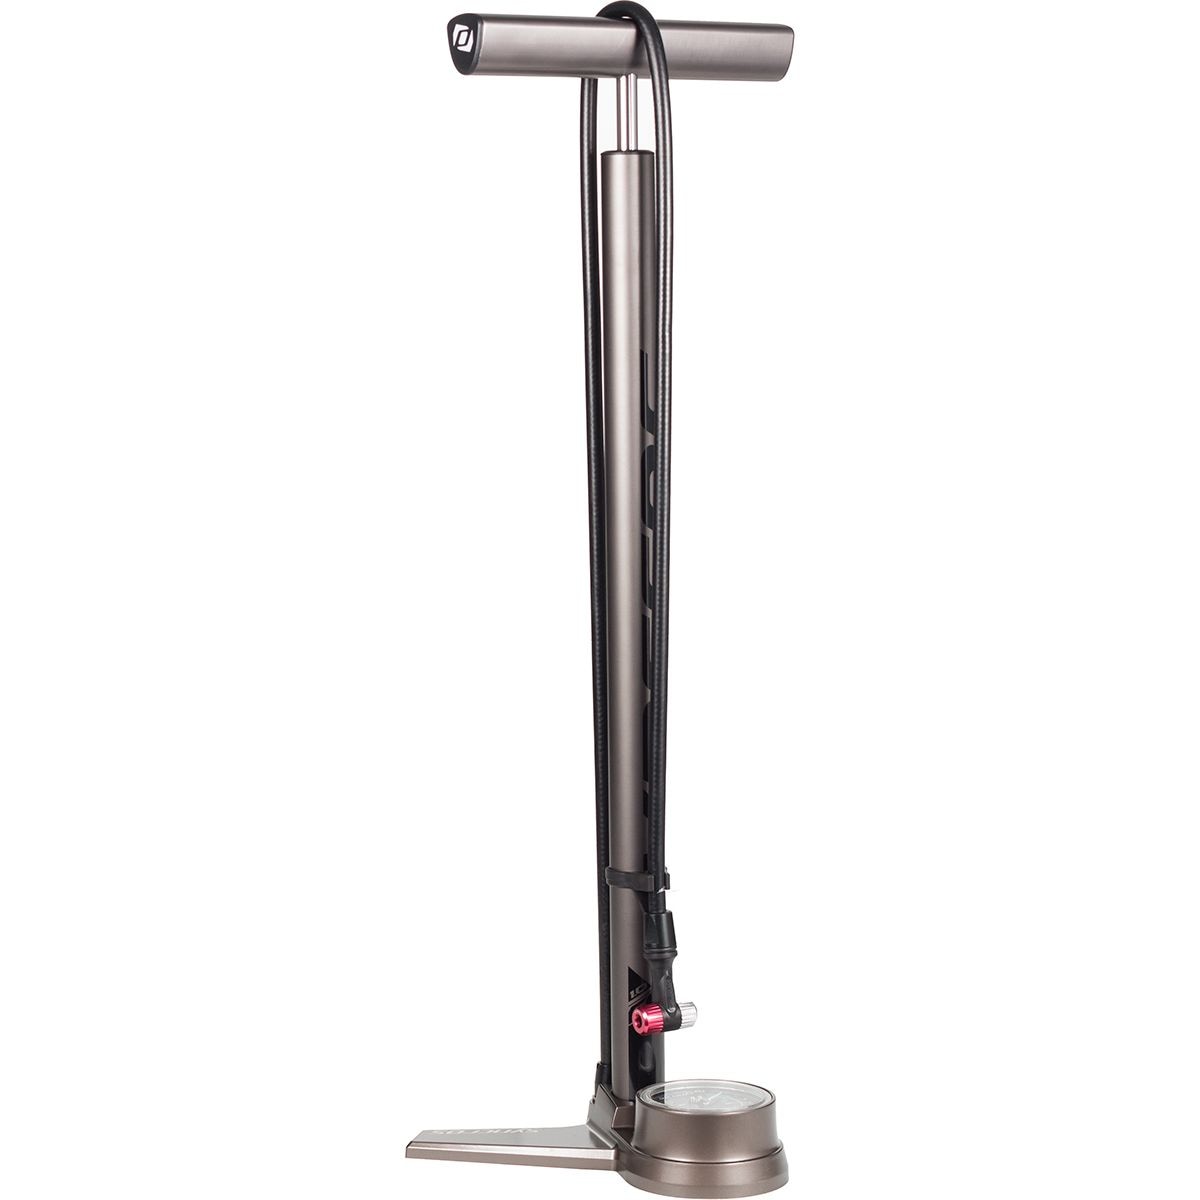 Syncros FP1.0 Floor Pump Anthracite, One Size